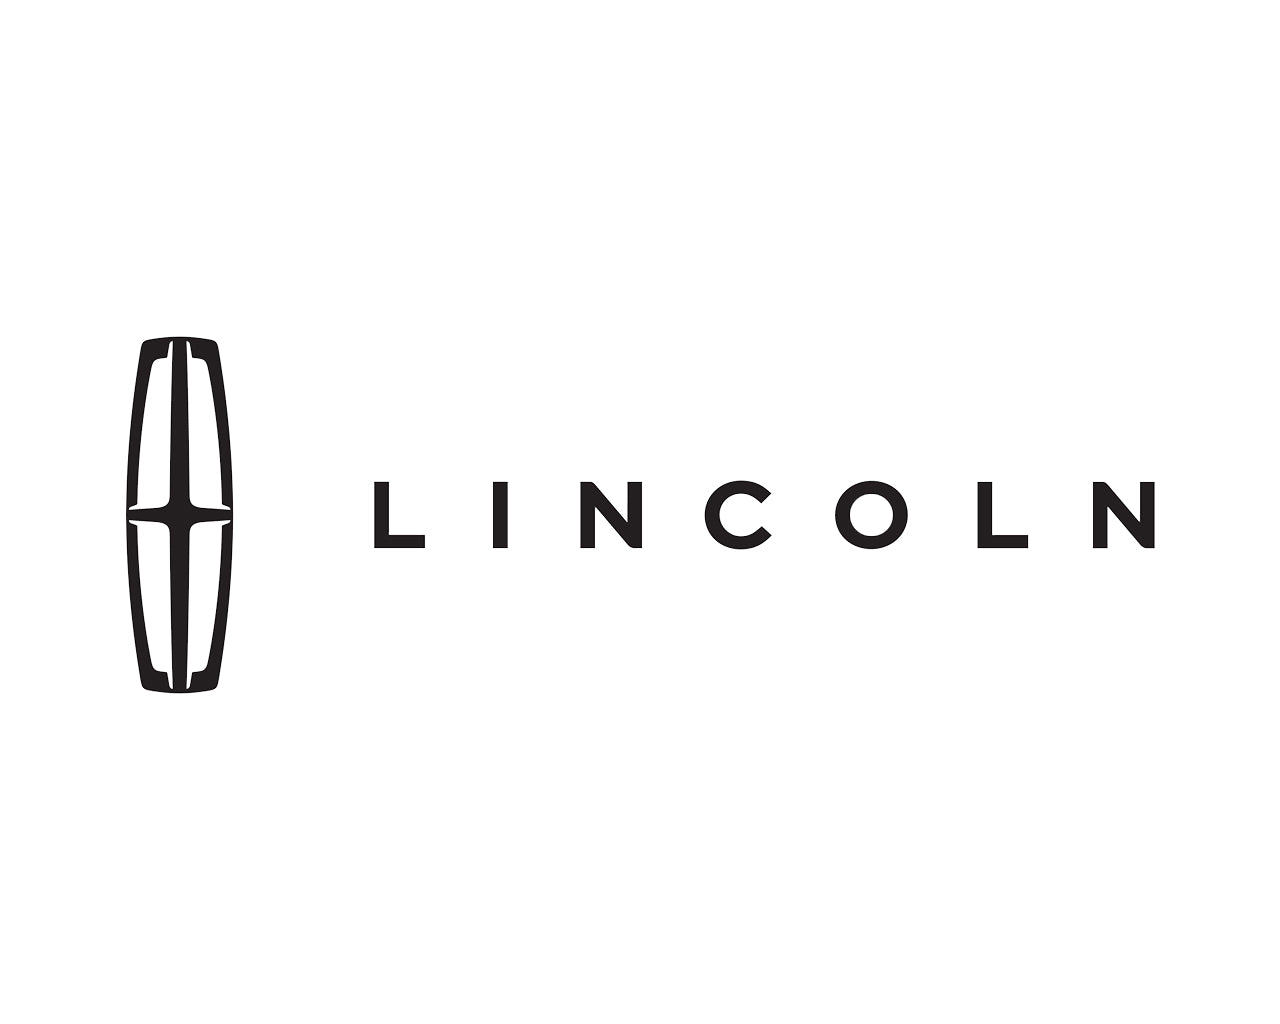 Black Cross symbol next to the word Lincoln in all caps, everything is black on white background